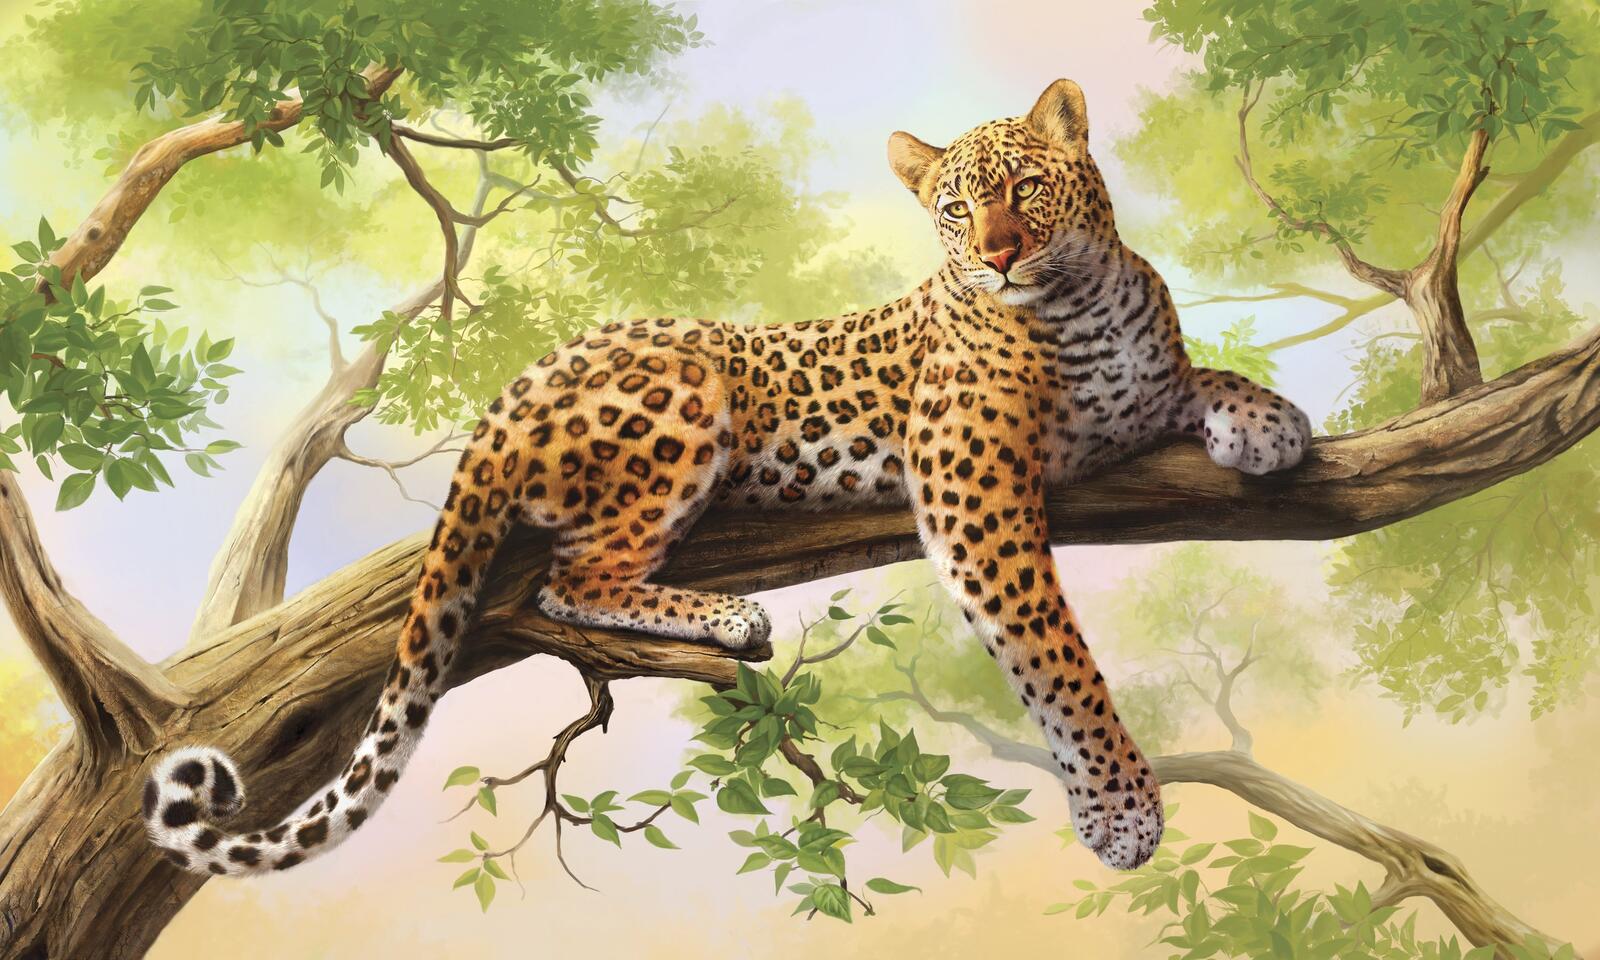 Free photo A drawing of a leopard lying on a tree branch